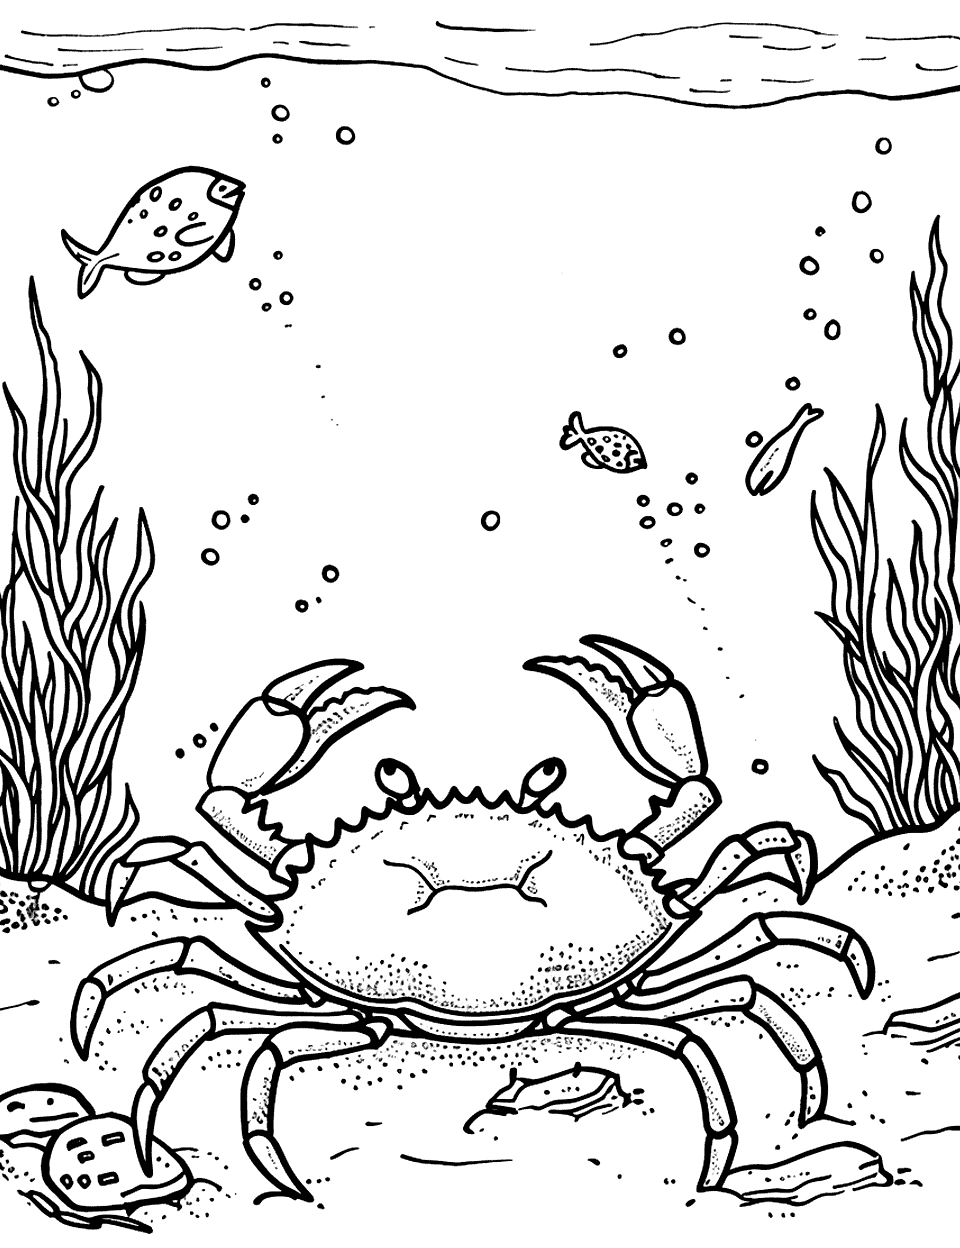 Ocean Floor Scene Crab Coloring Page - A detailed scene of a crab slowly walking along the ocean floor, with seaweed and small rocks around.